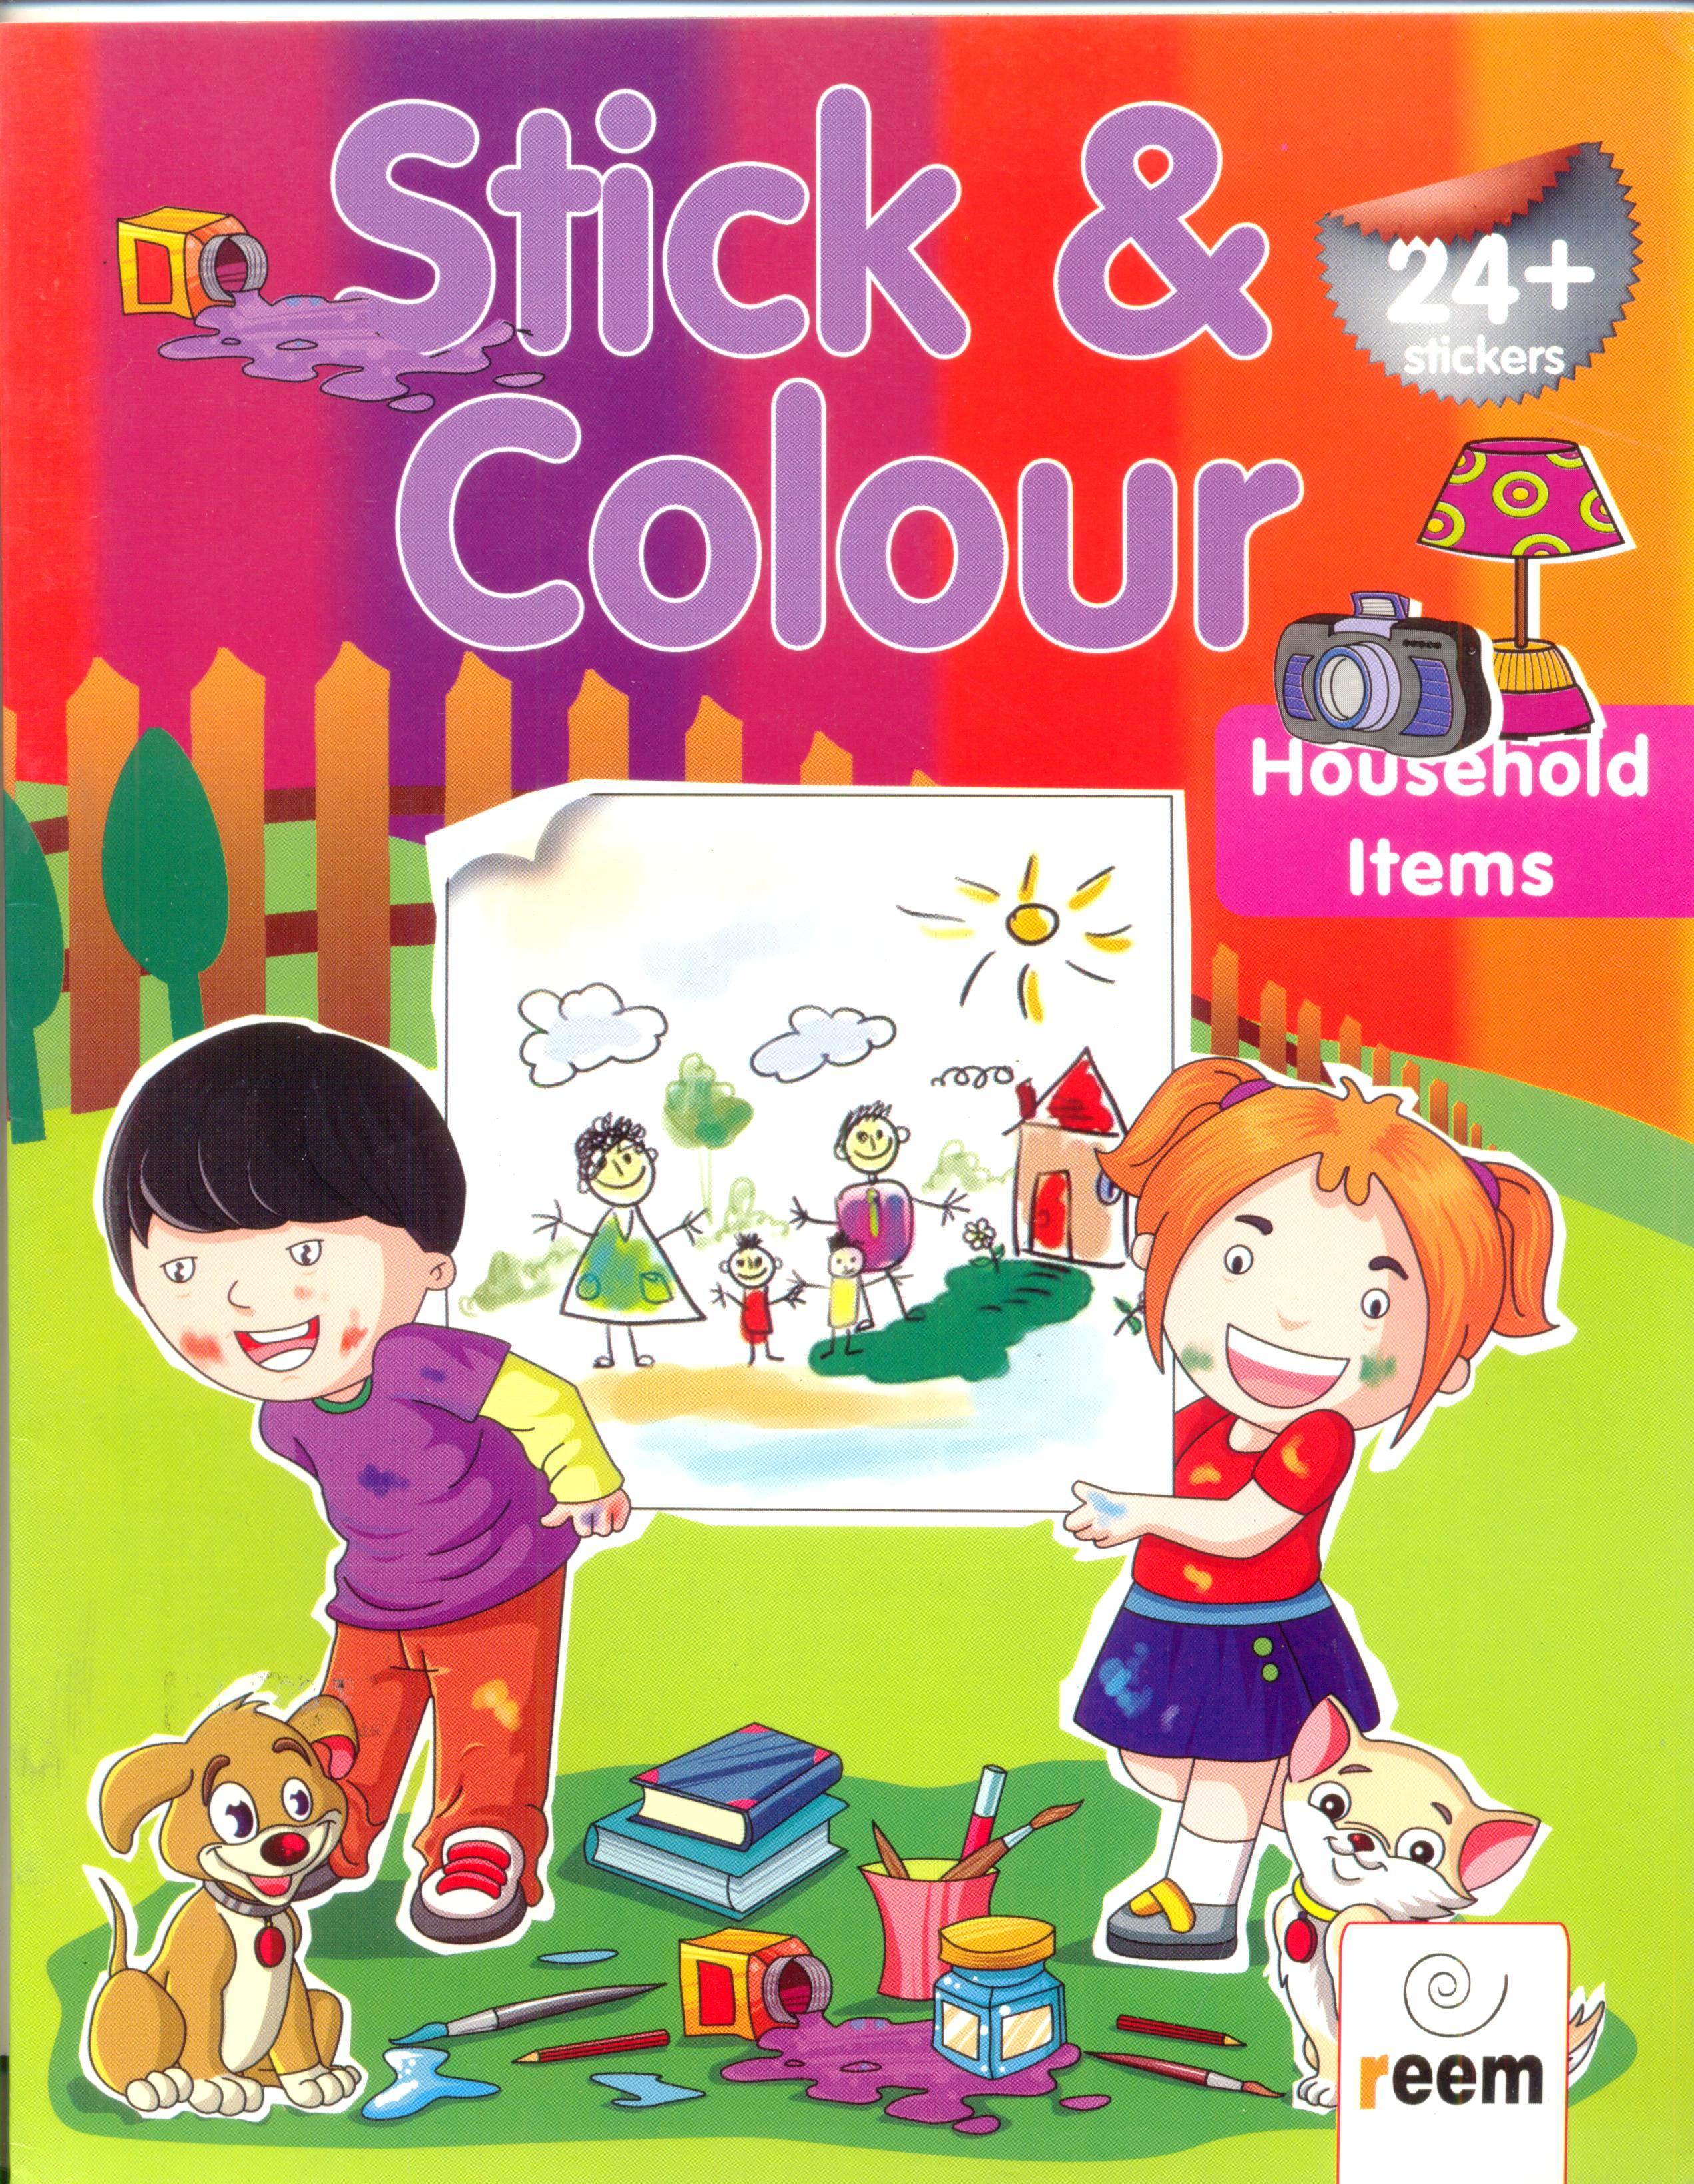 Stick N Colour (Household Items)